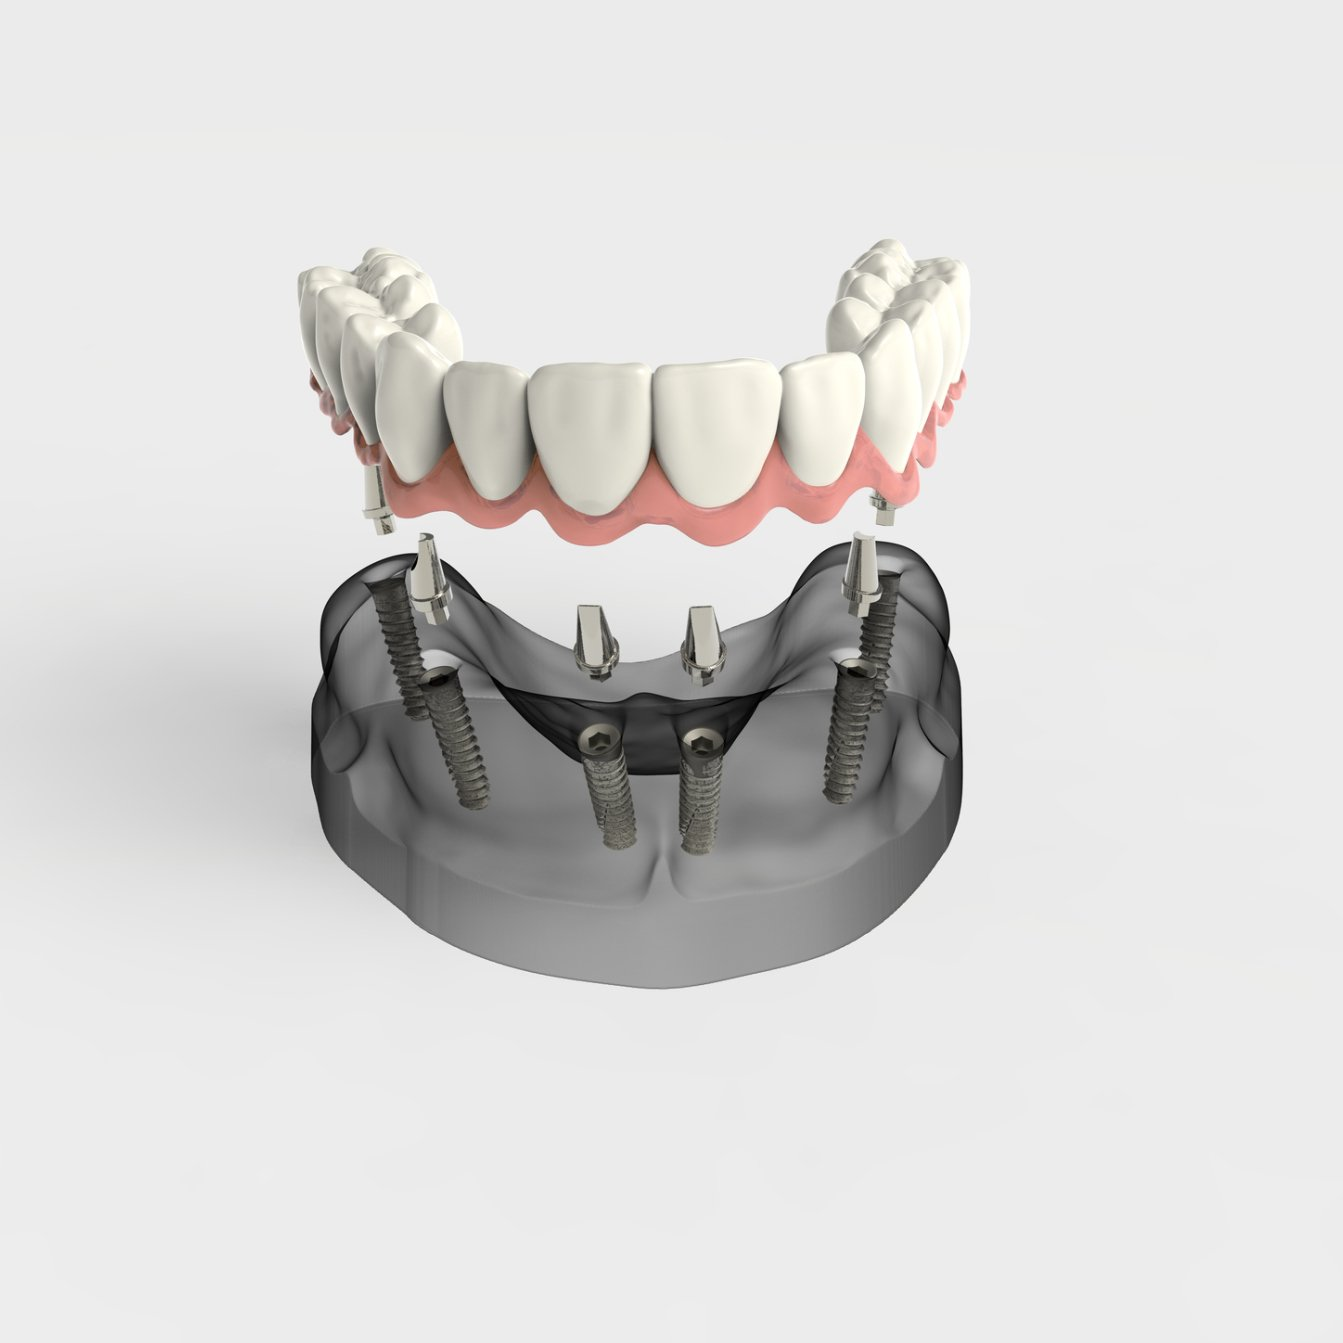 Image representing teeth restoration surgery in Cary, NC